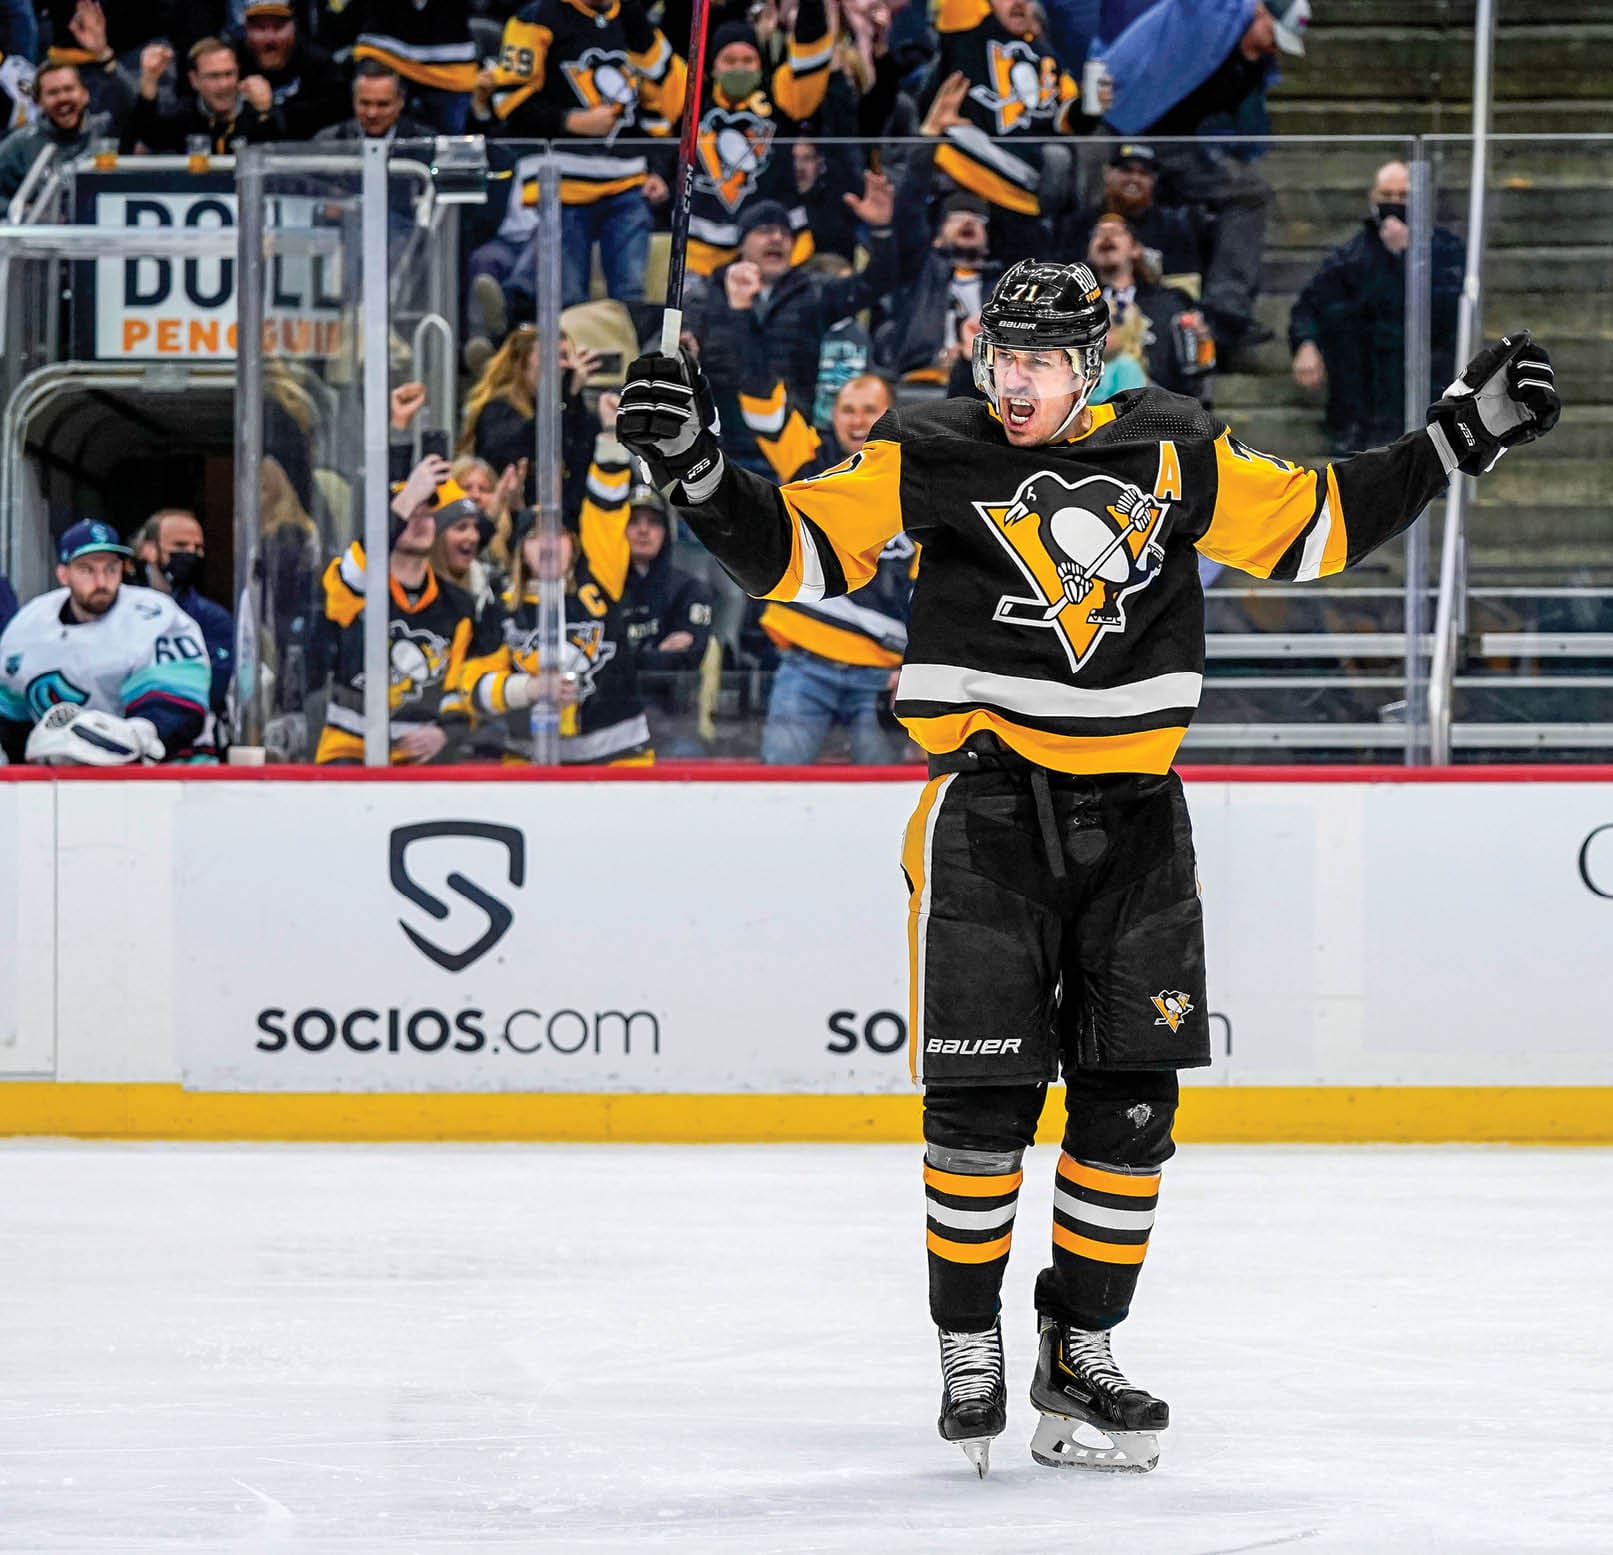 PITTSBURGH, PA - JANUARY 27: Pittsburgh Penguins Center Evgeni Malkin (71) reacts in celebration after scoring a goal during the third period in the NHL game between the Pittsburgh Penguins and the Seattle Kraken on January 27, 2022, at PPG Paints Arena in Pittsburgh, PA  (Photo by Jeanine Leech Icon Sportswire via Getty Images)